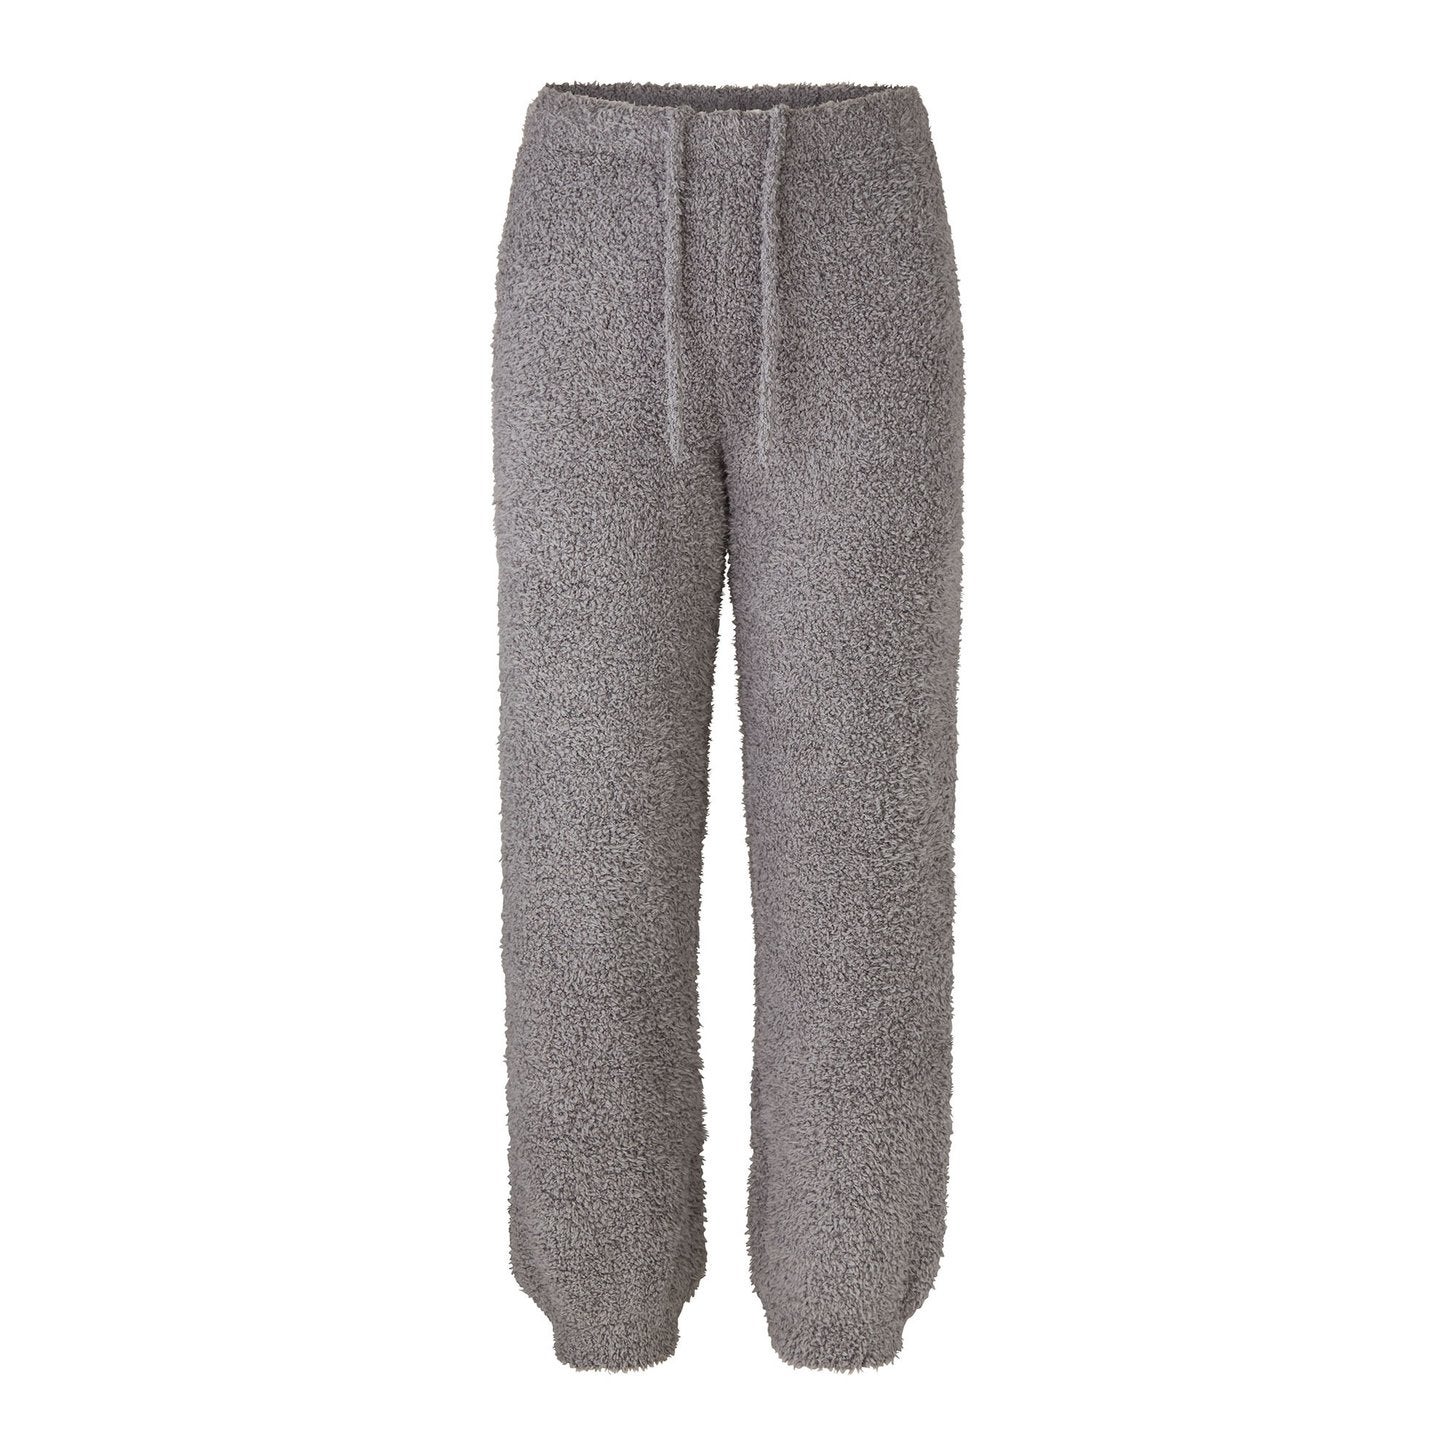 Knit Jogger Pants – The Feisty Bull Boutique